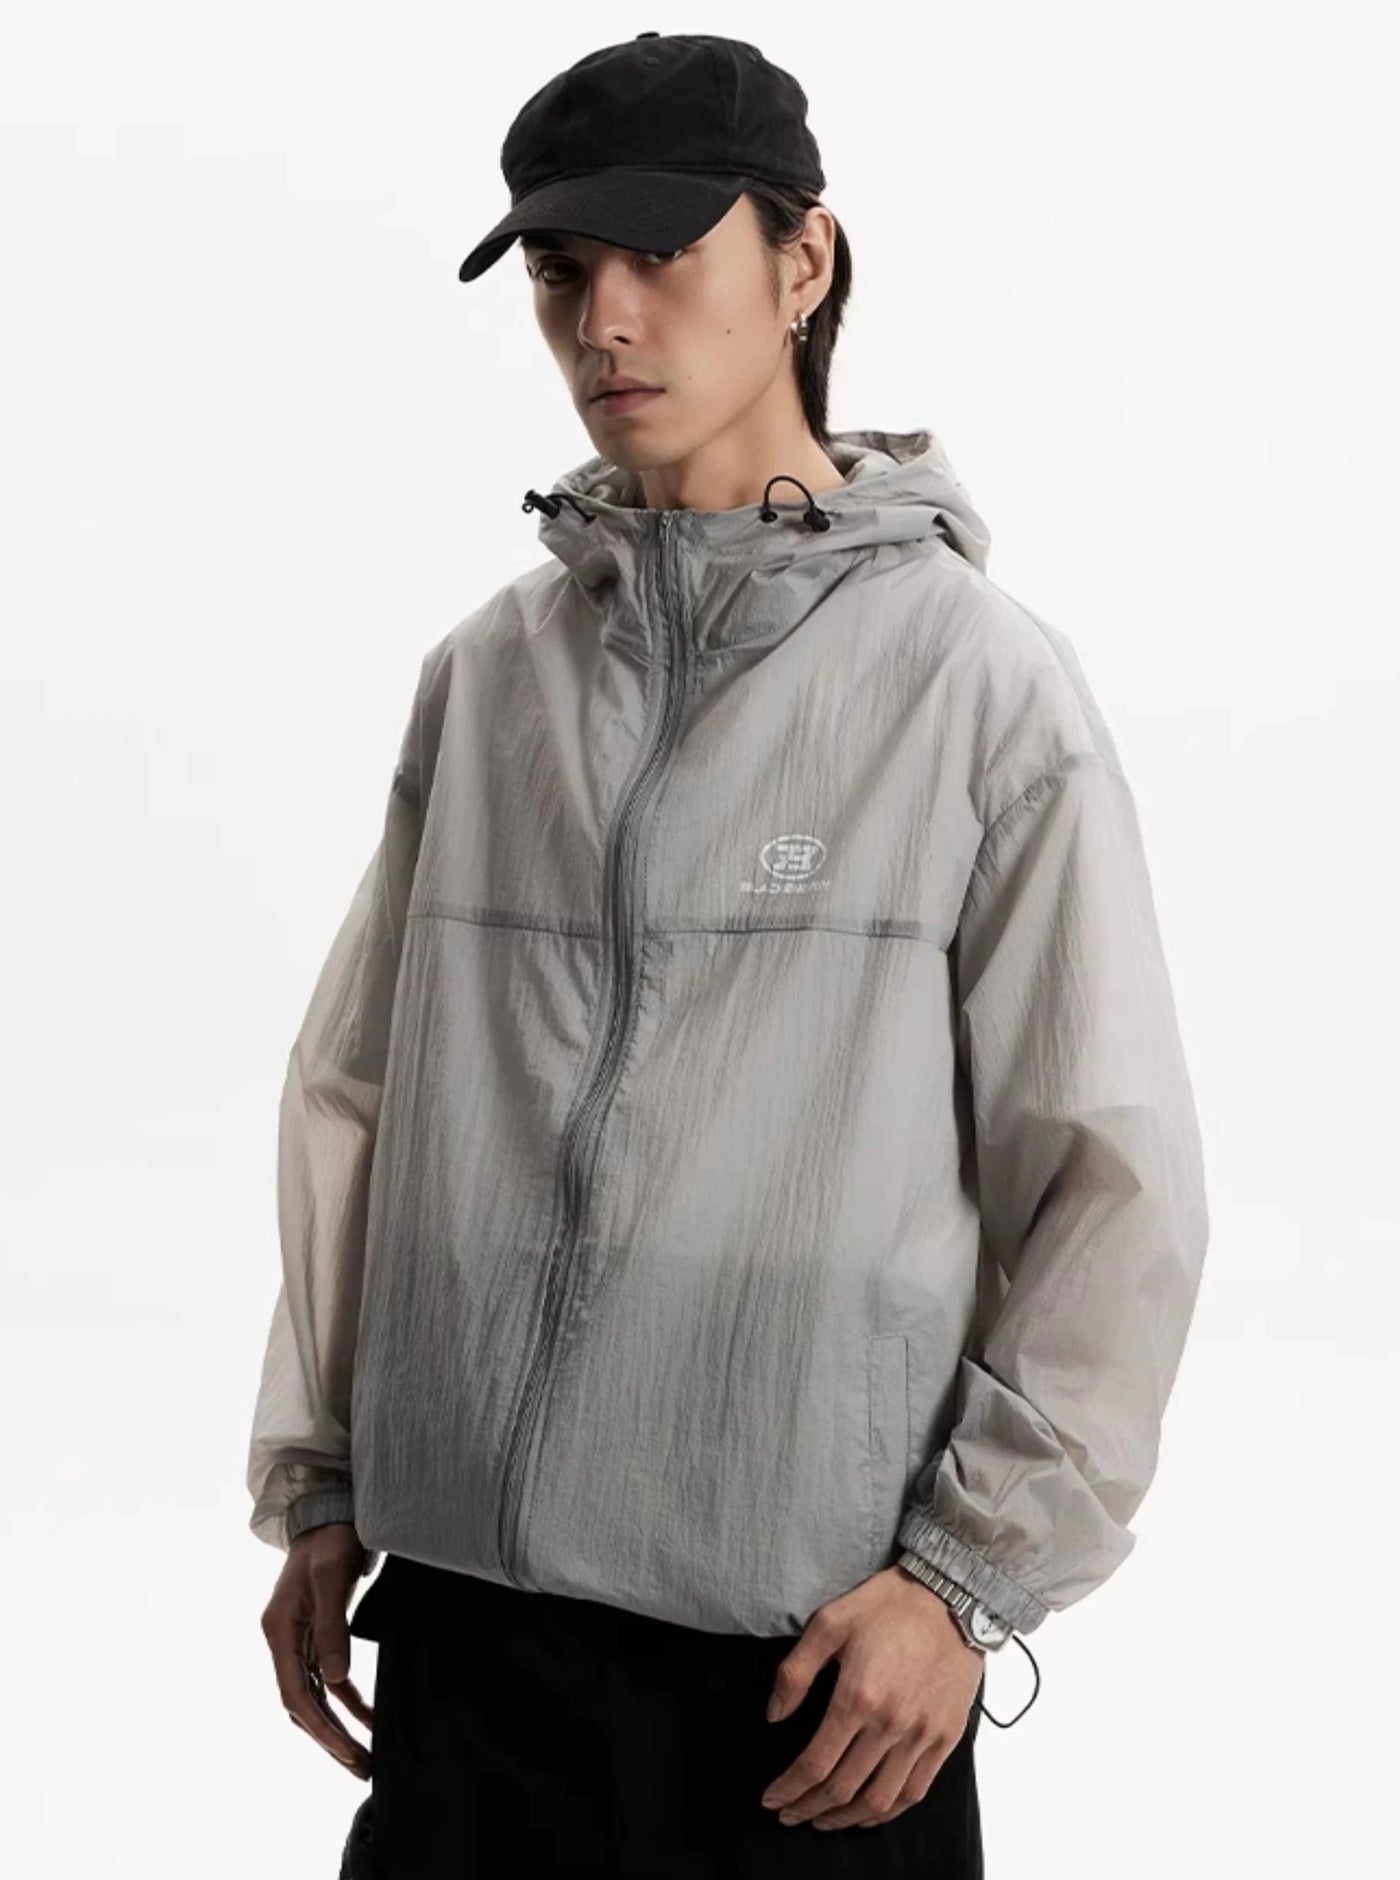 Zippered and Hooded Sun Protection Thin Jacket Korean Street Fashion Jacket By A PUEE Shop Online at OH Vault